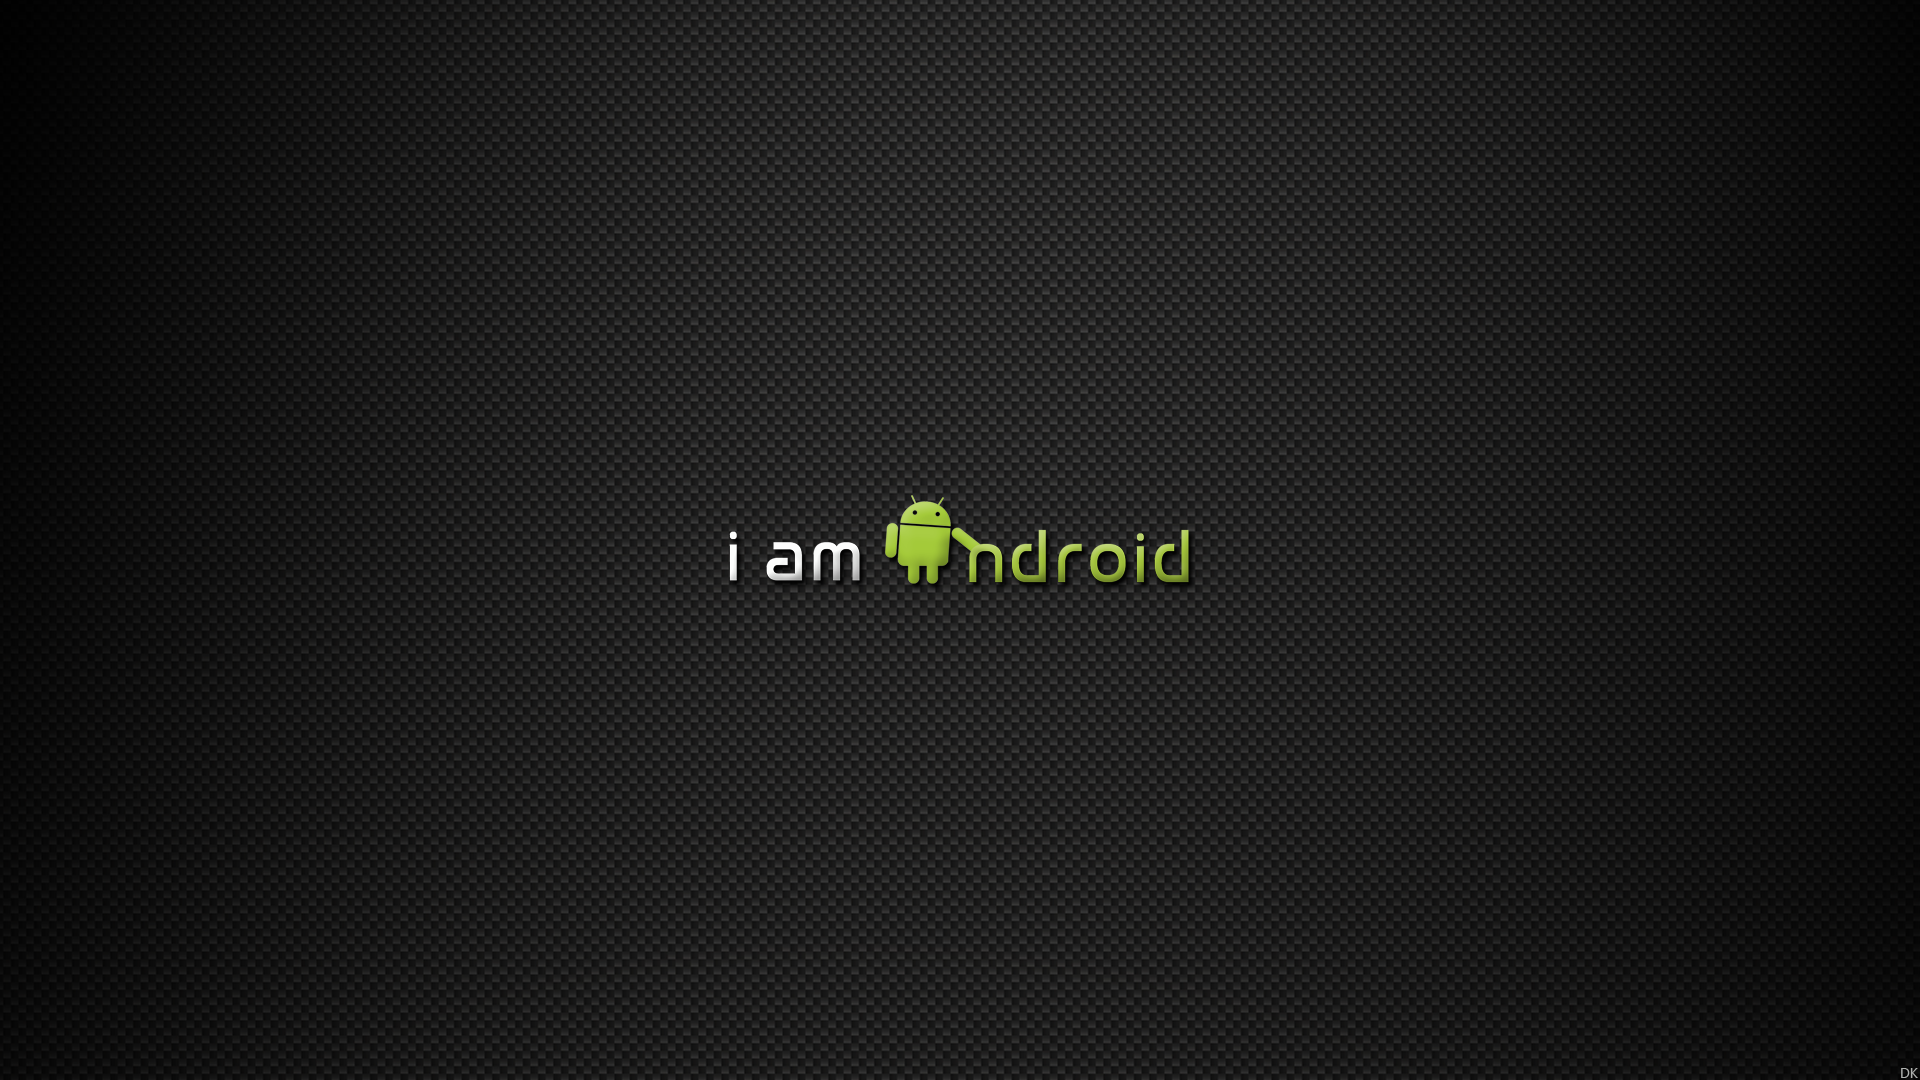 Related Wallpaper For Android Logo Black Background